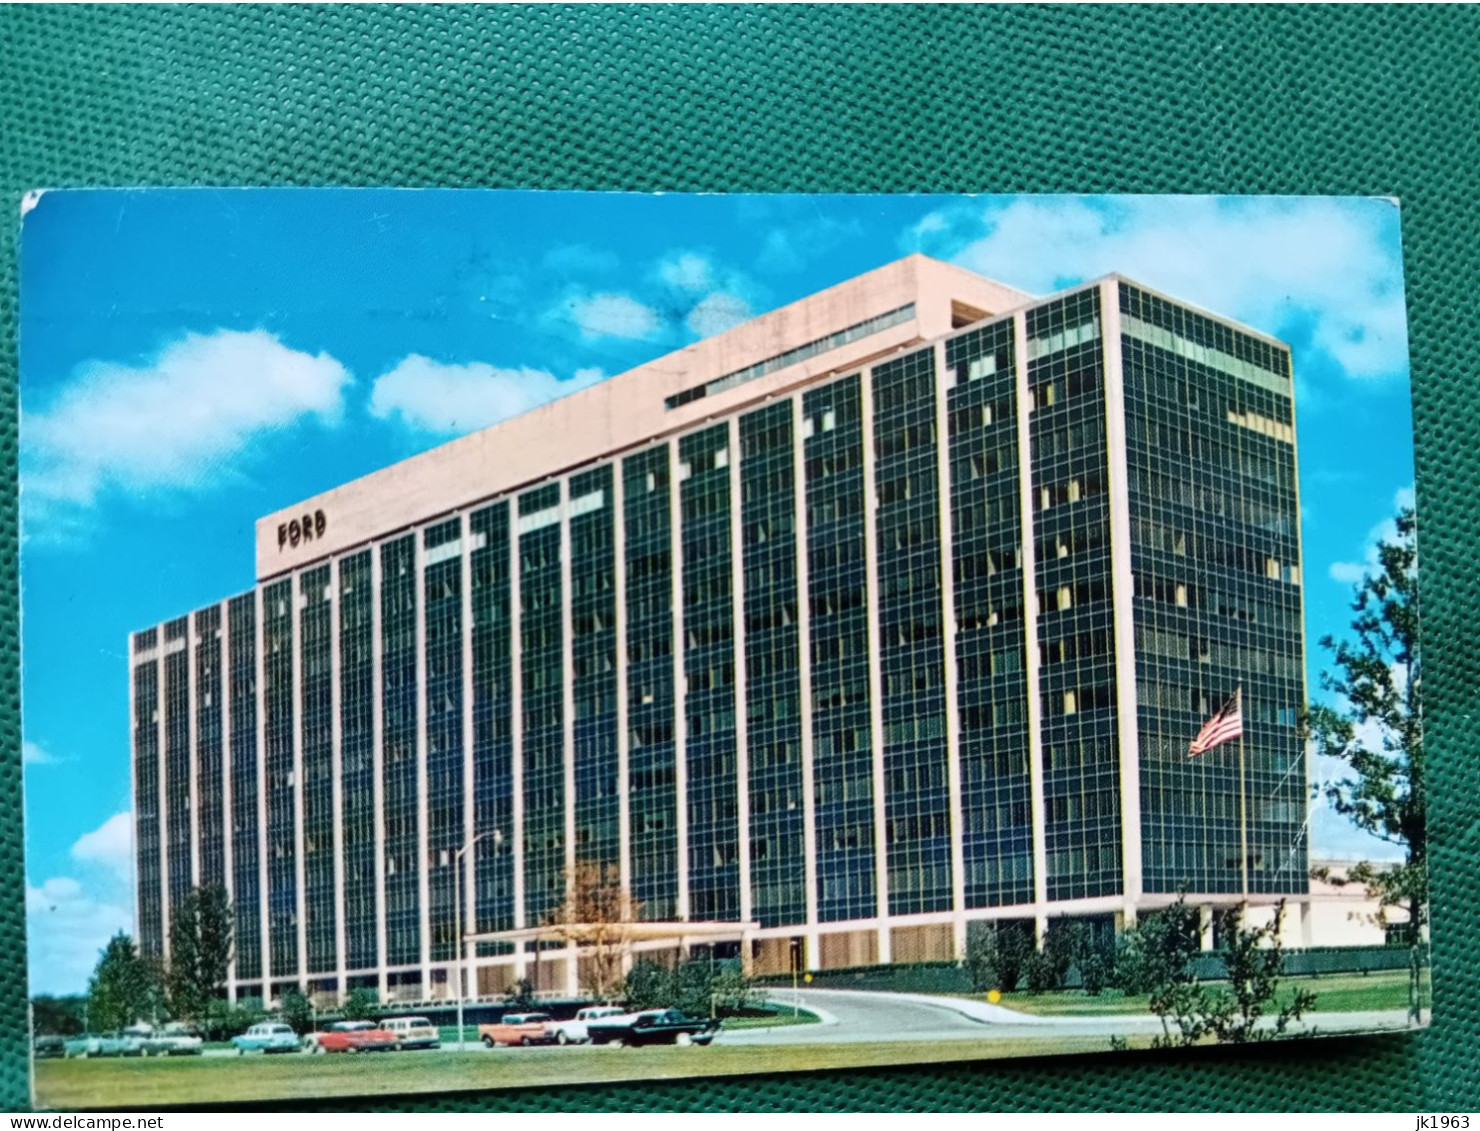 FORD MOTOR COMPANY, CENTRAL OFFICE, 1958 - Dearborn